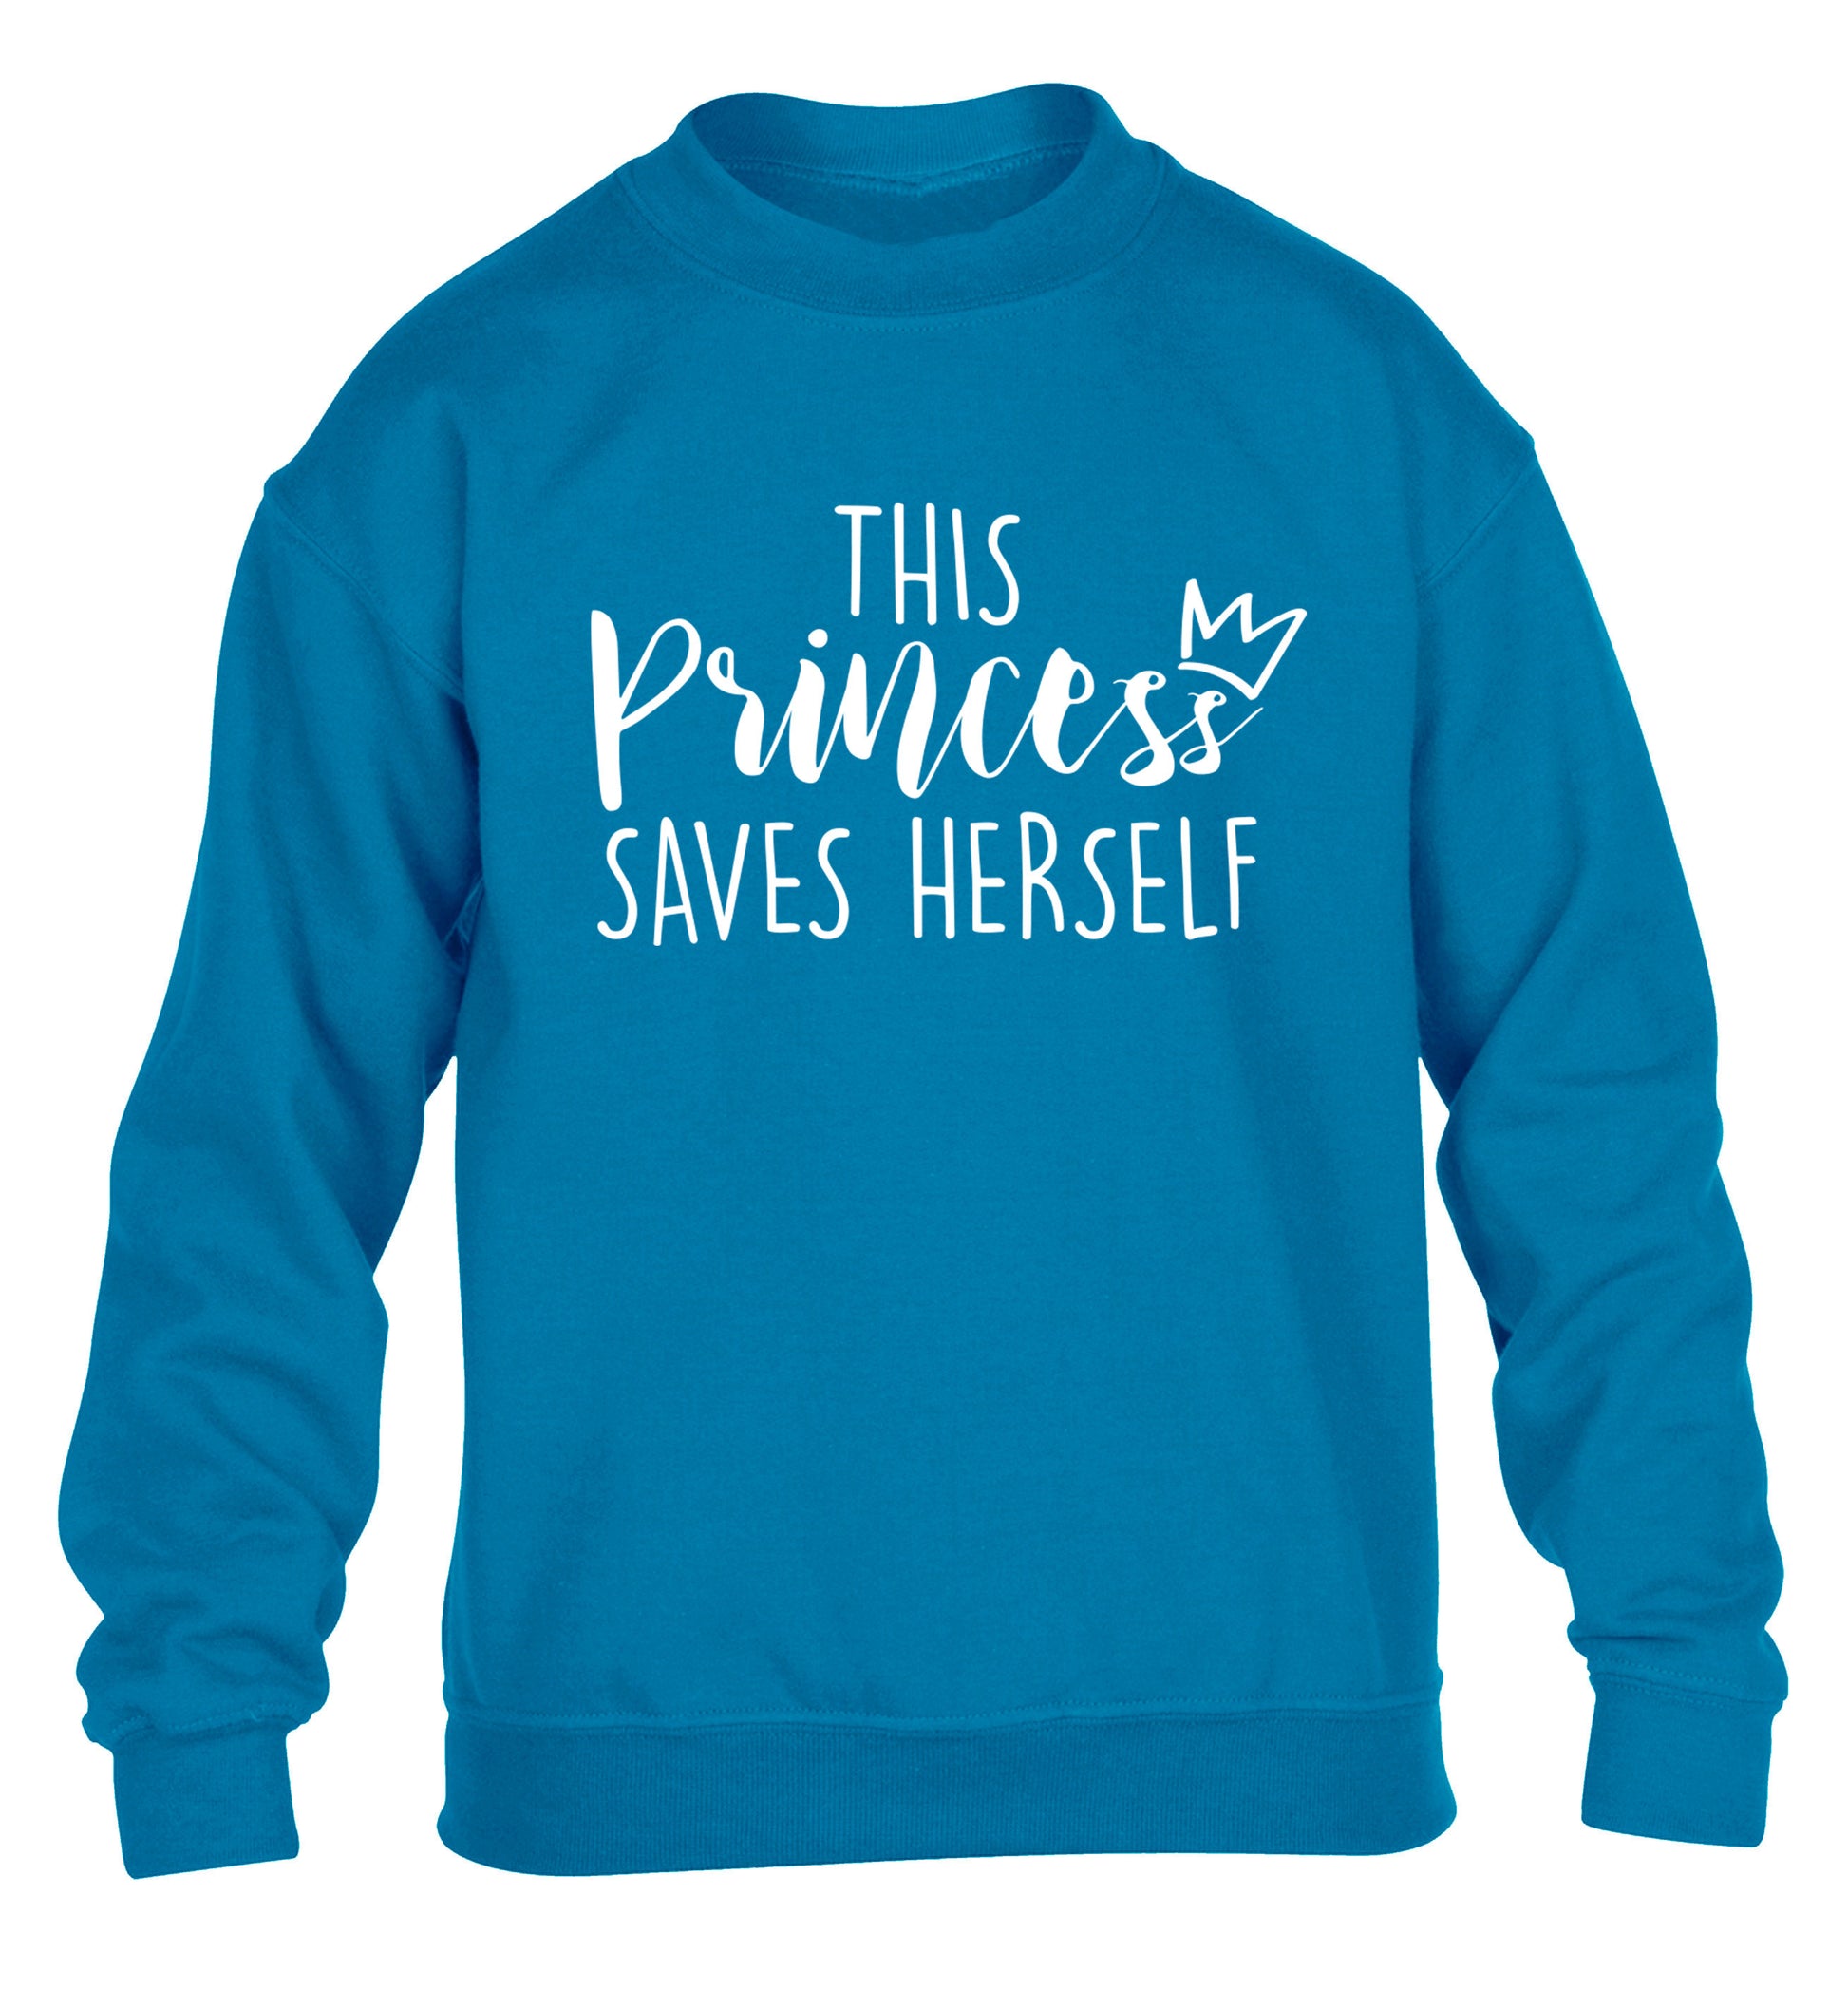 This princess saves herself children's blue sweater 12-14 Years